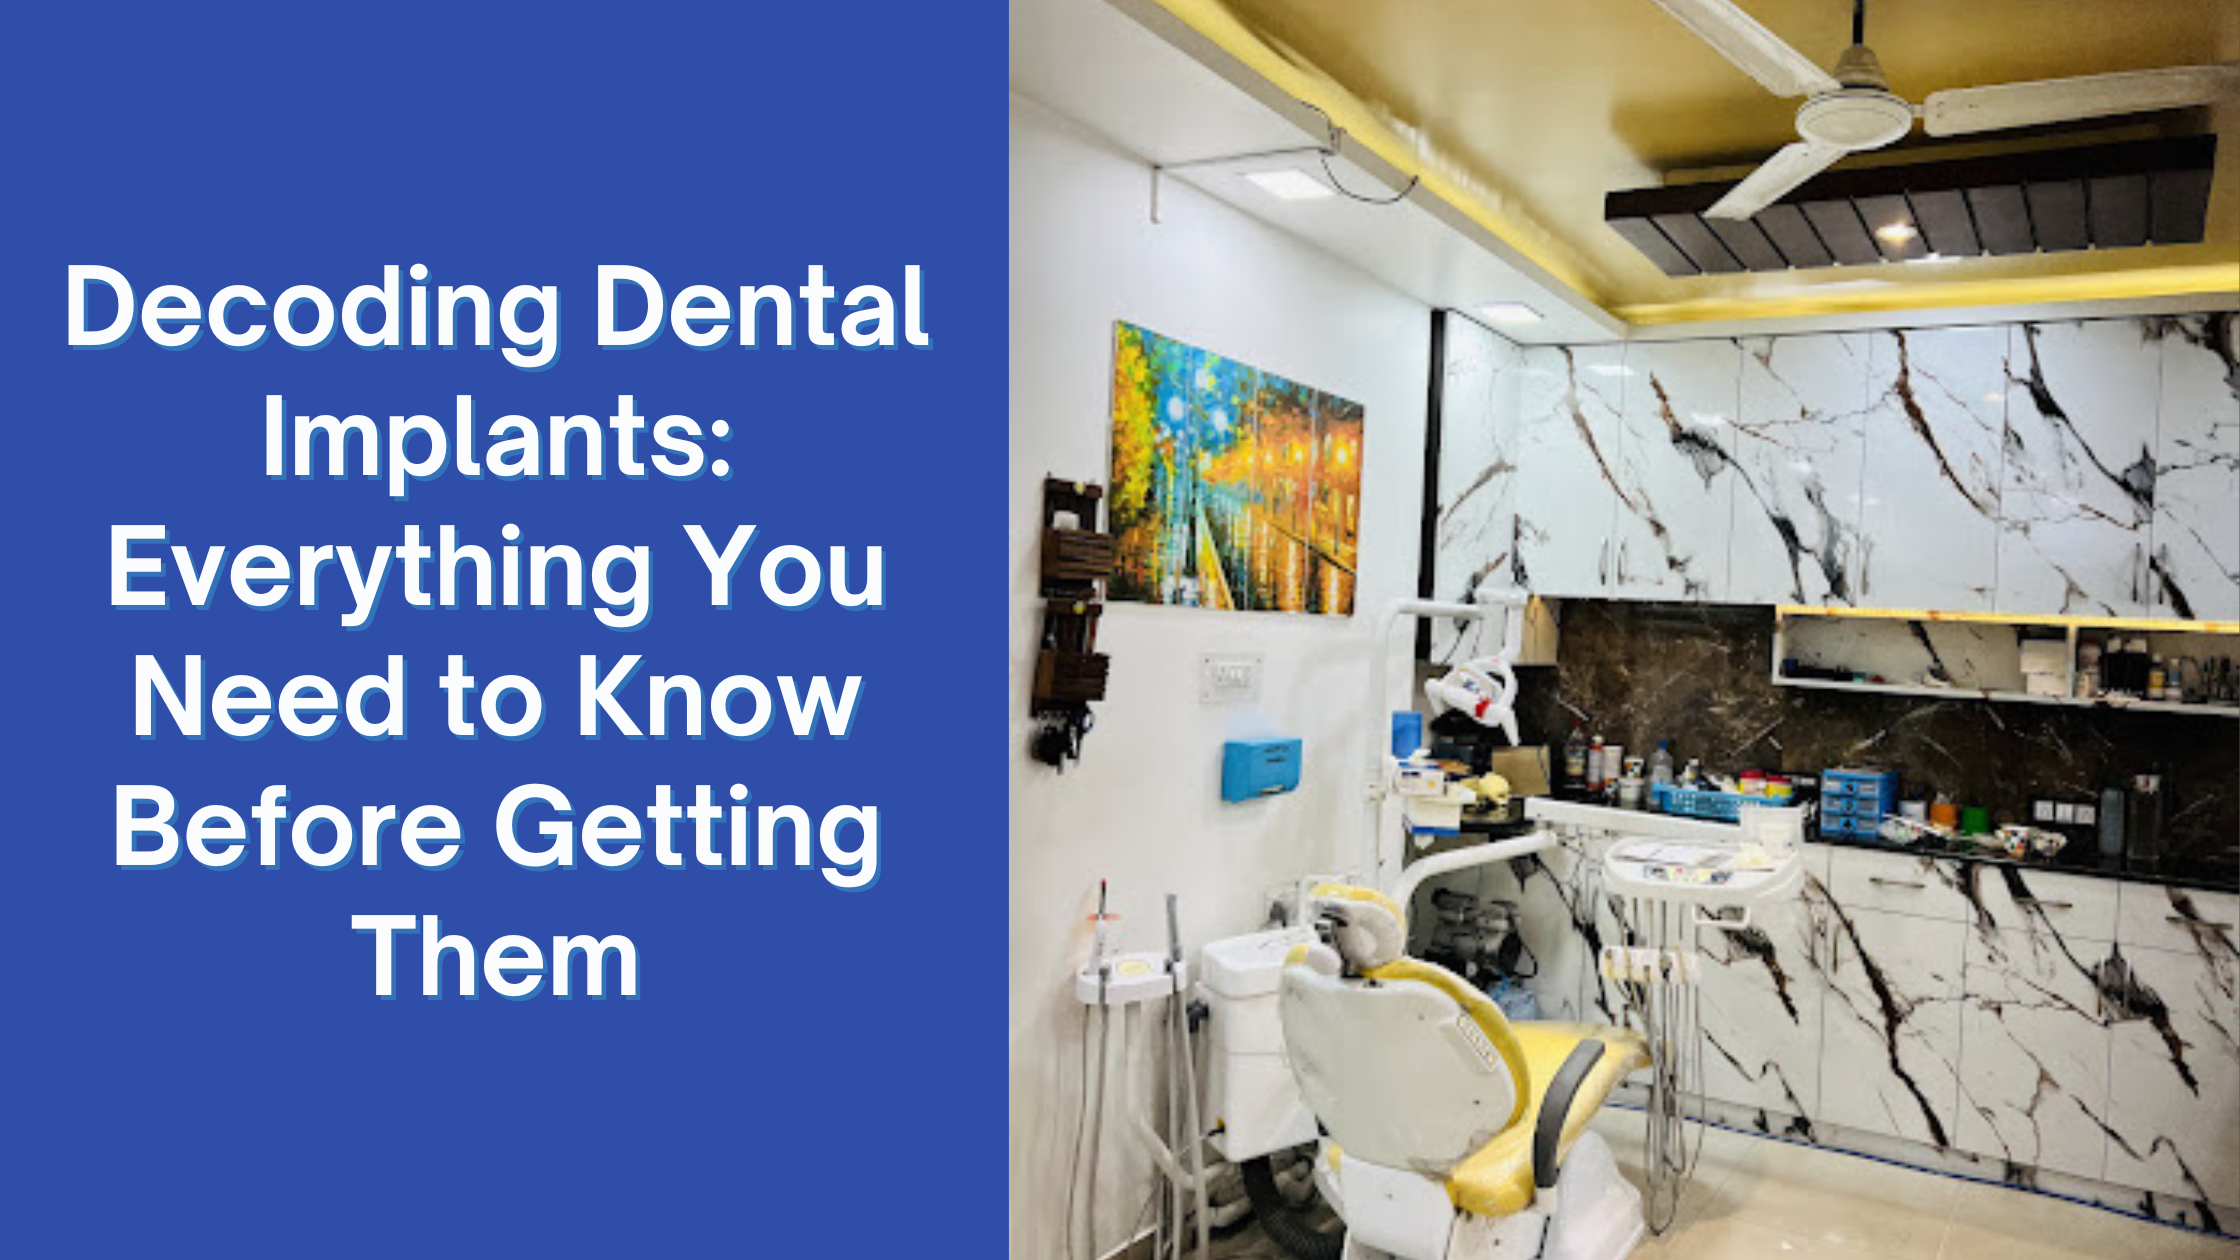 Decoding Dental Implants: Everything You Need to Know Before Getting Them